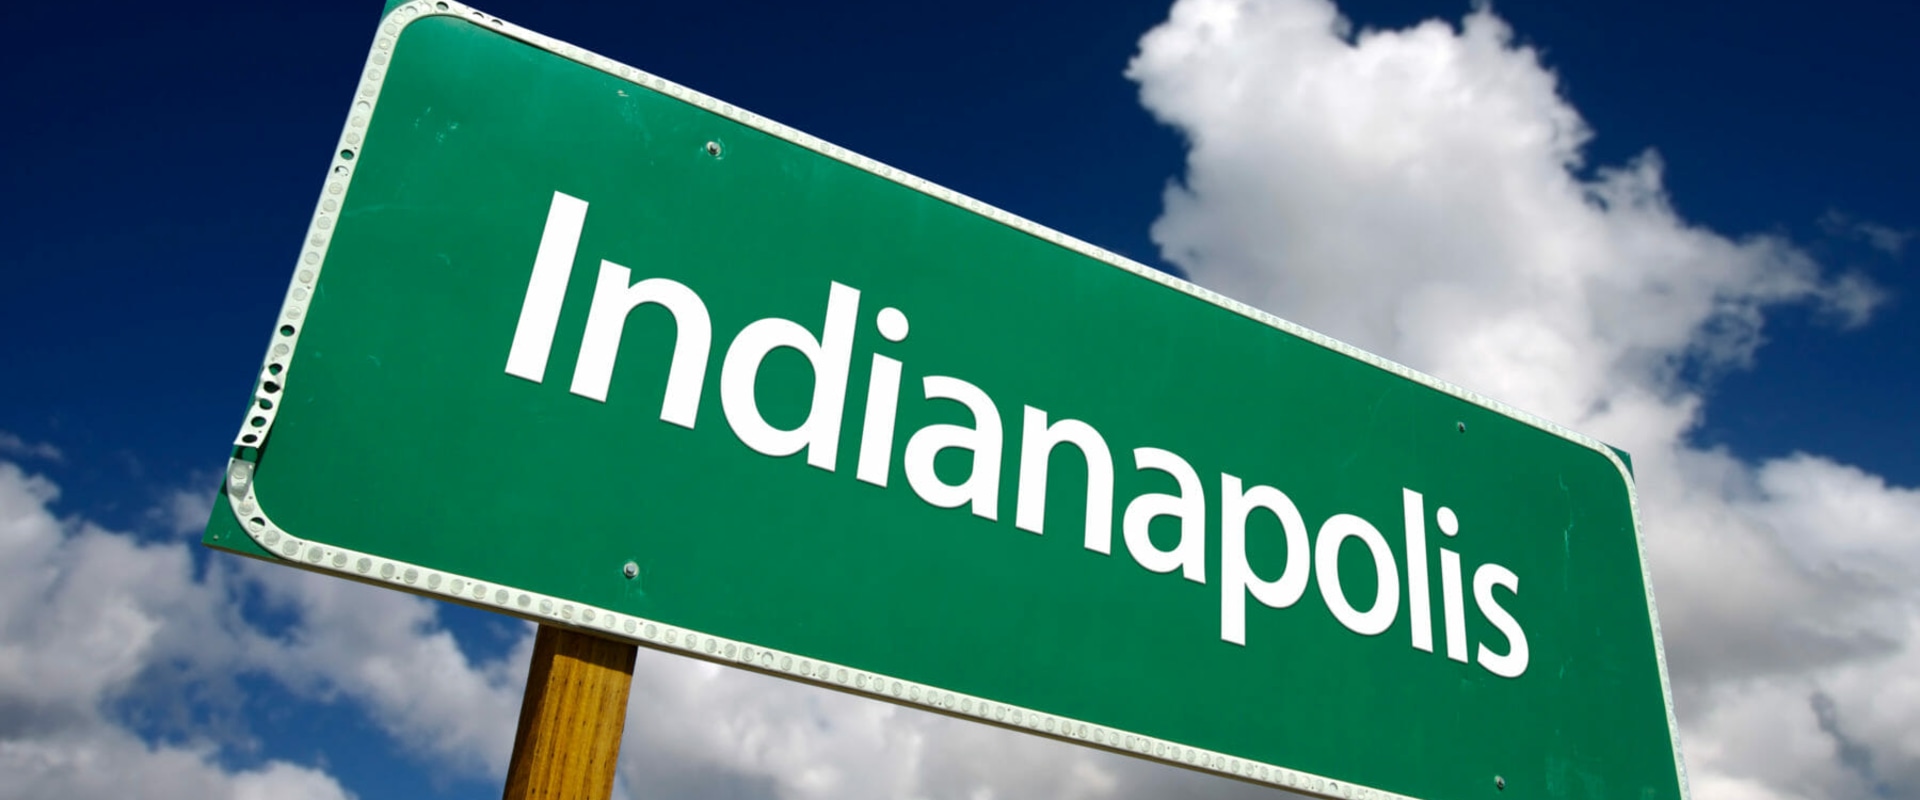 Networking for Employment in Indianapolis, Indiana: Resources to Help You Succeed